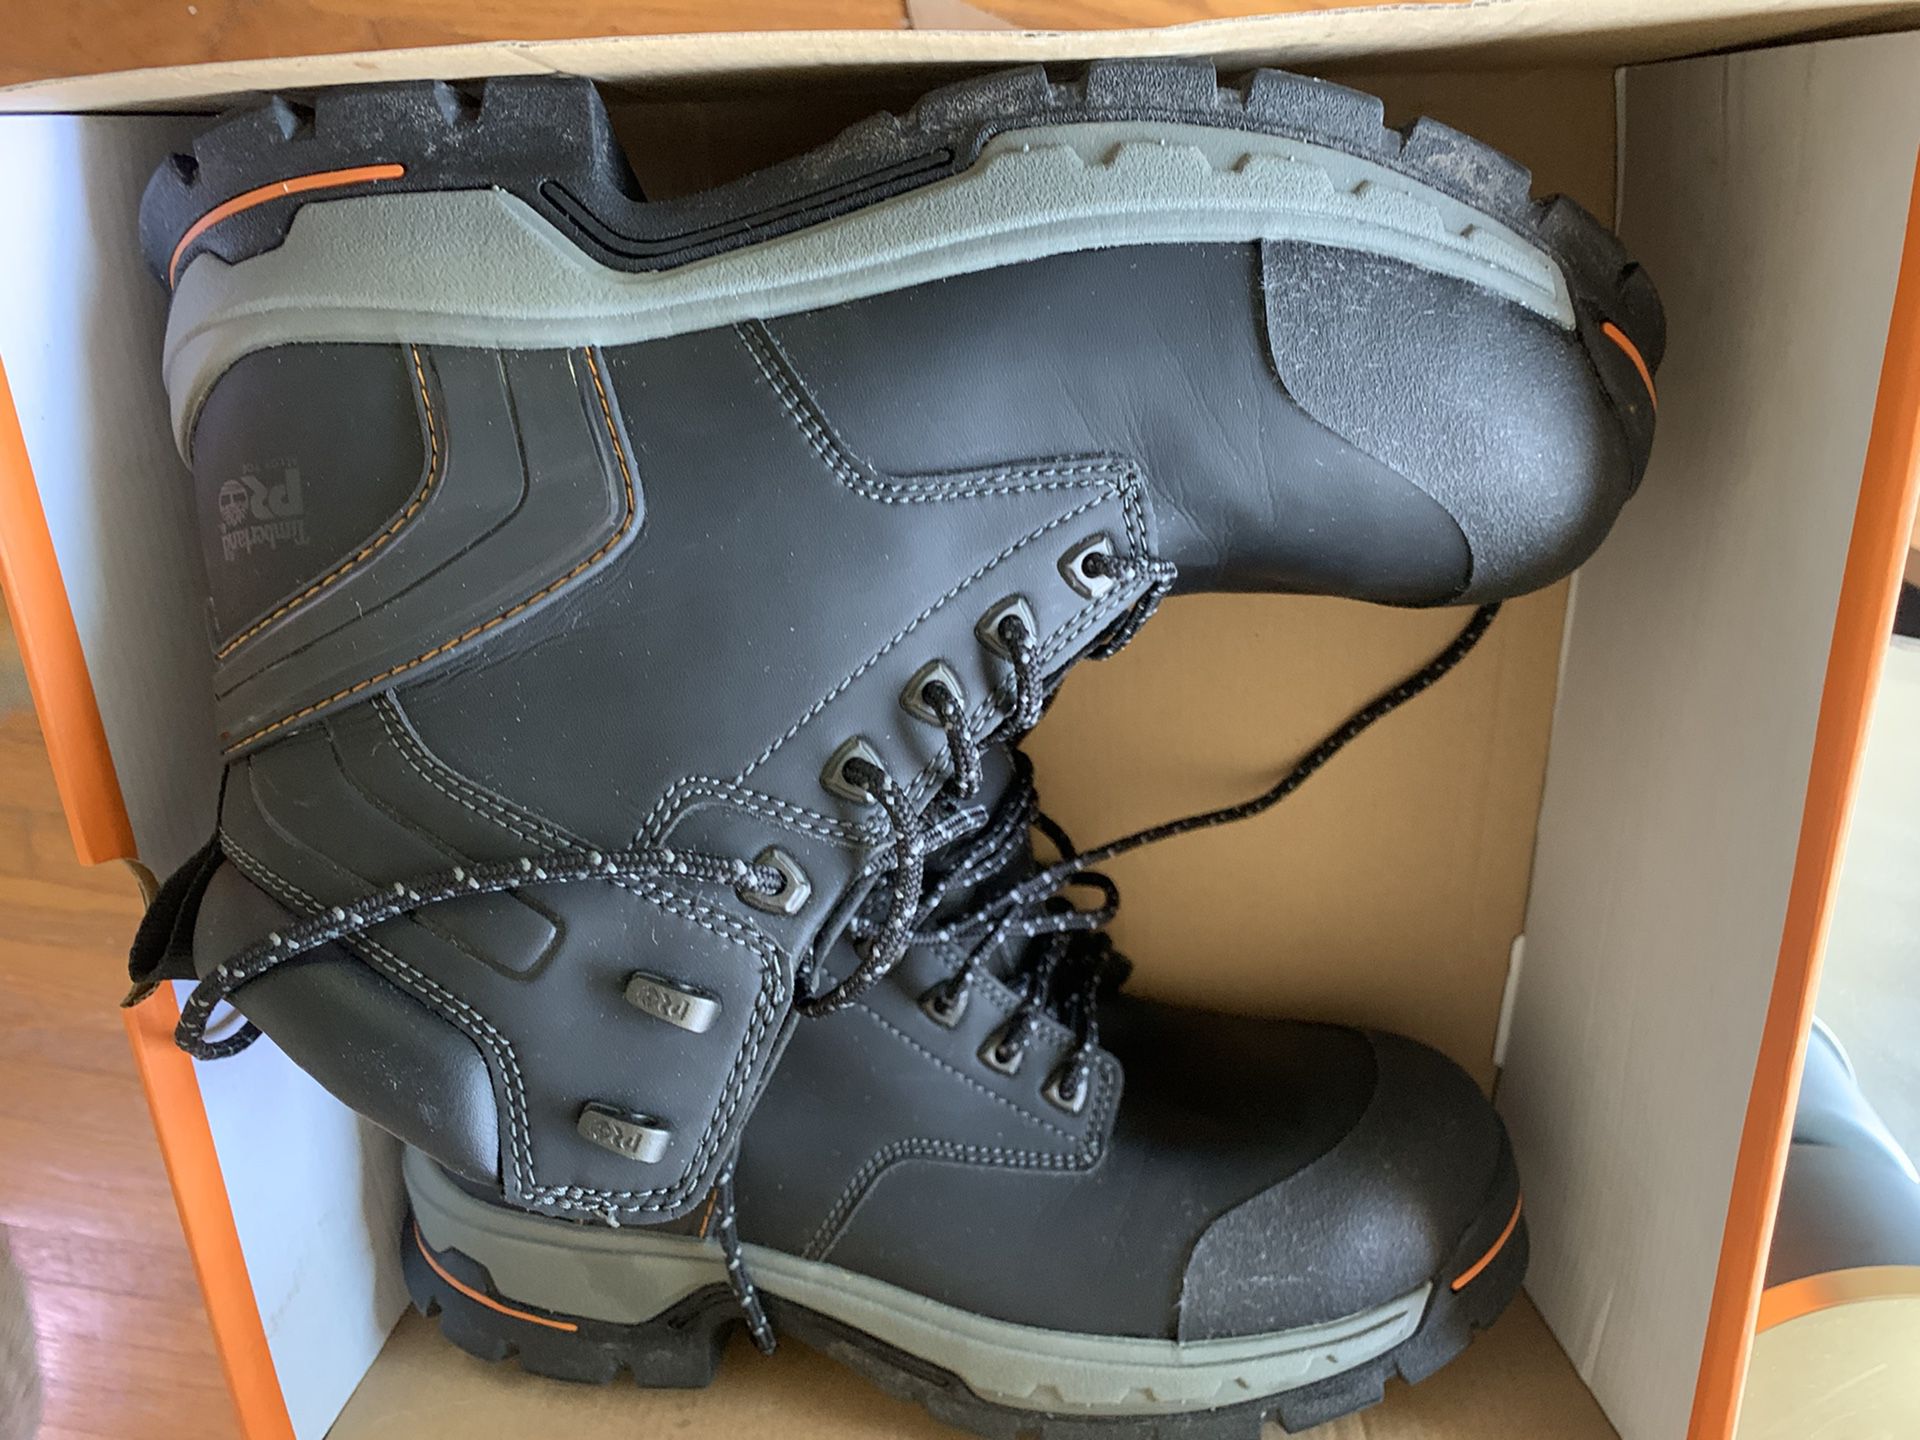 Work boots( timberland) 10.5 w